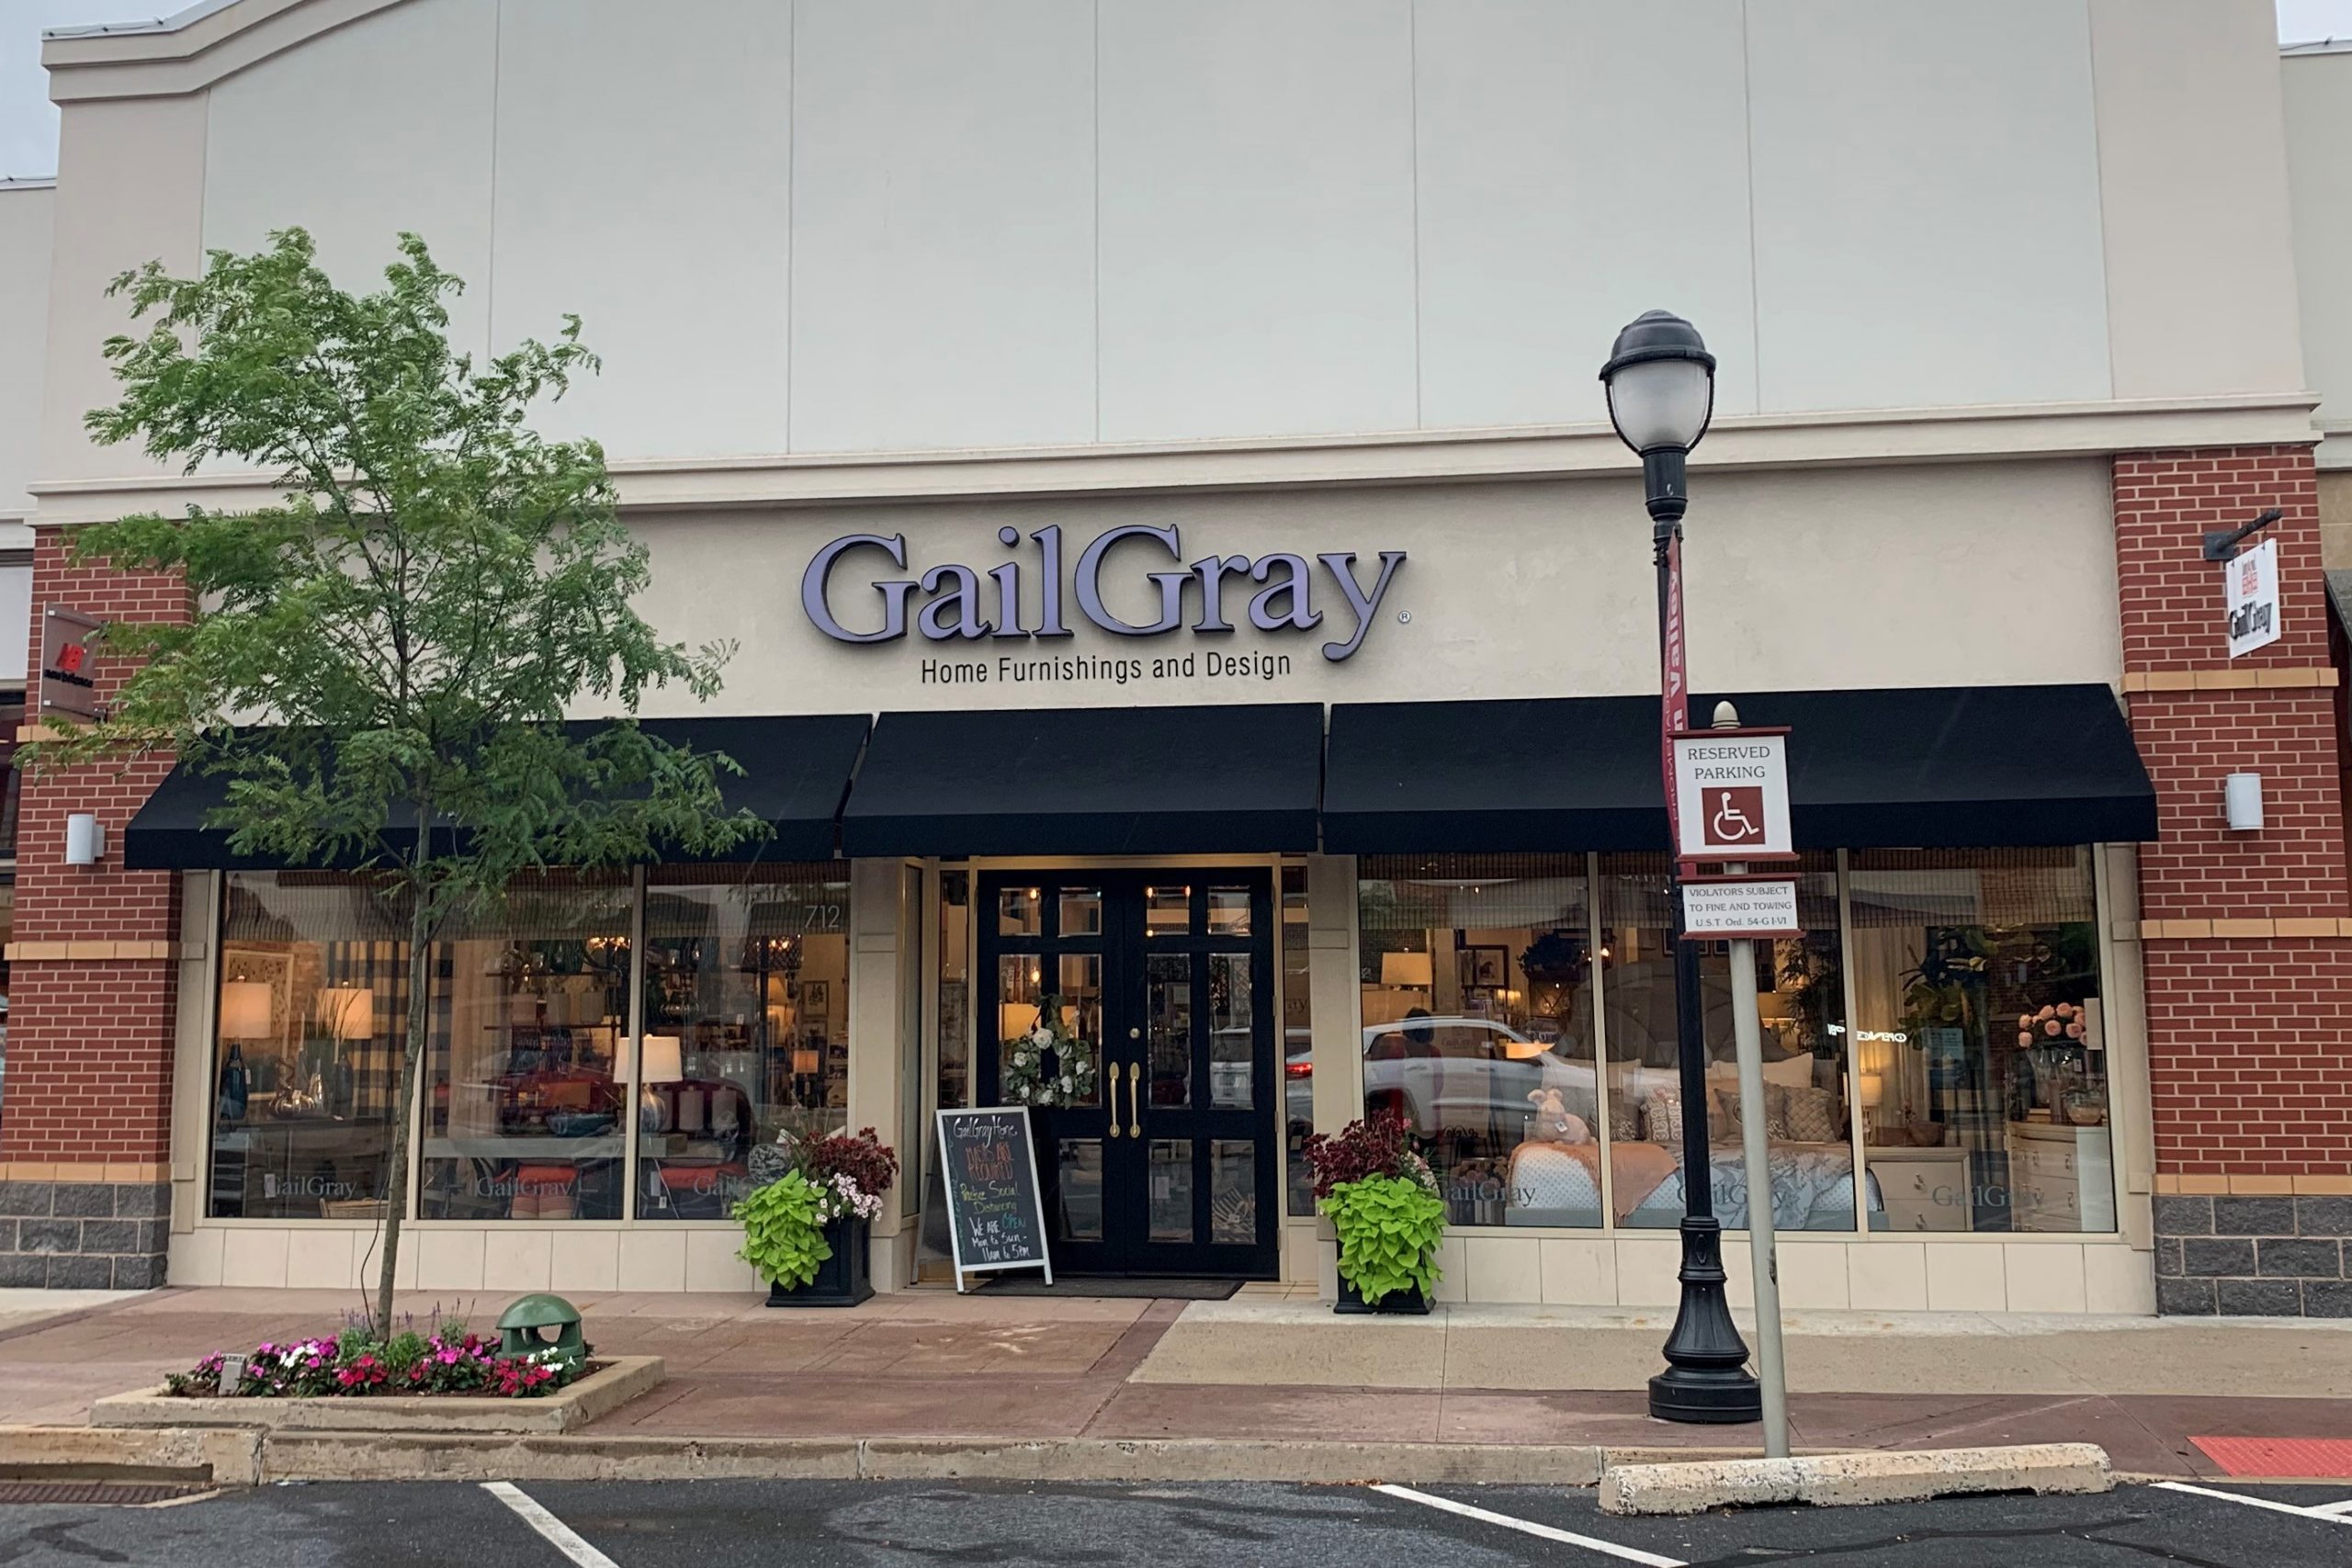 GailGray Home Furnishings Store and Interior Design Services in Lehigh Valley, Pennsylvania